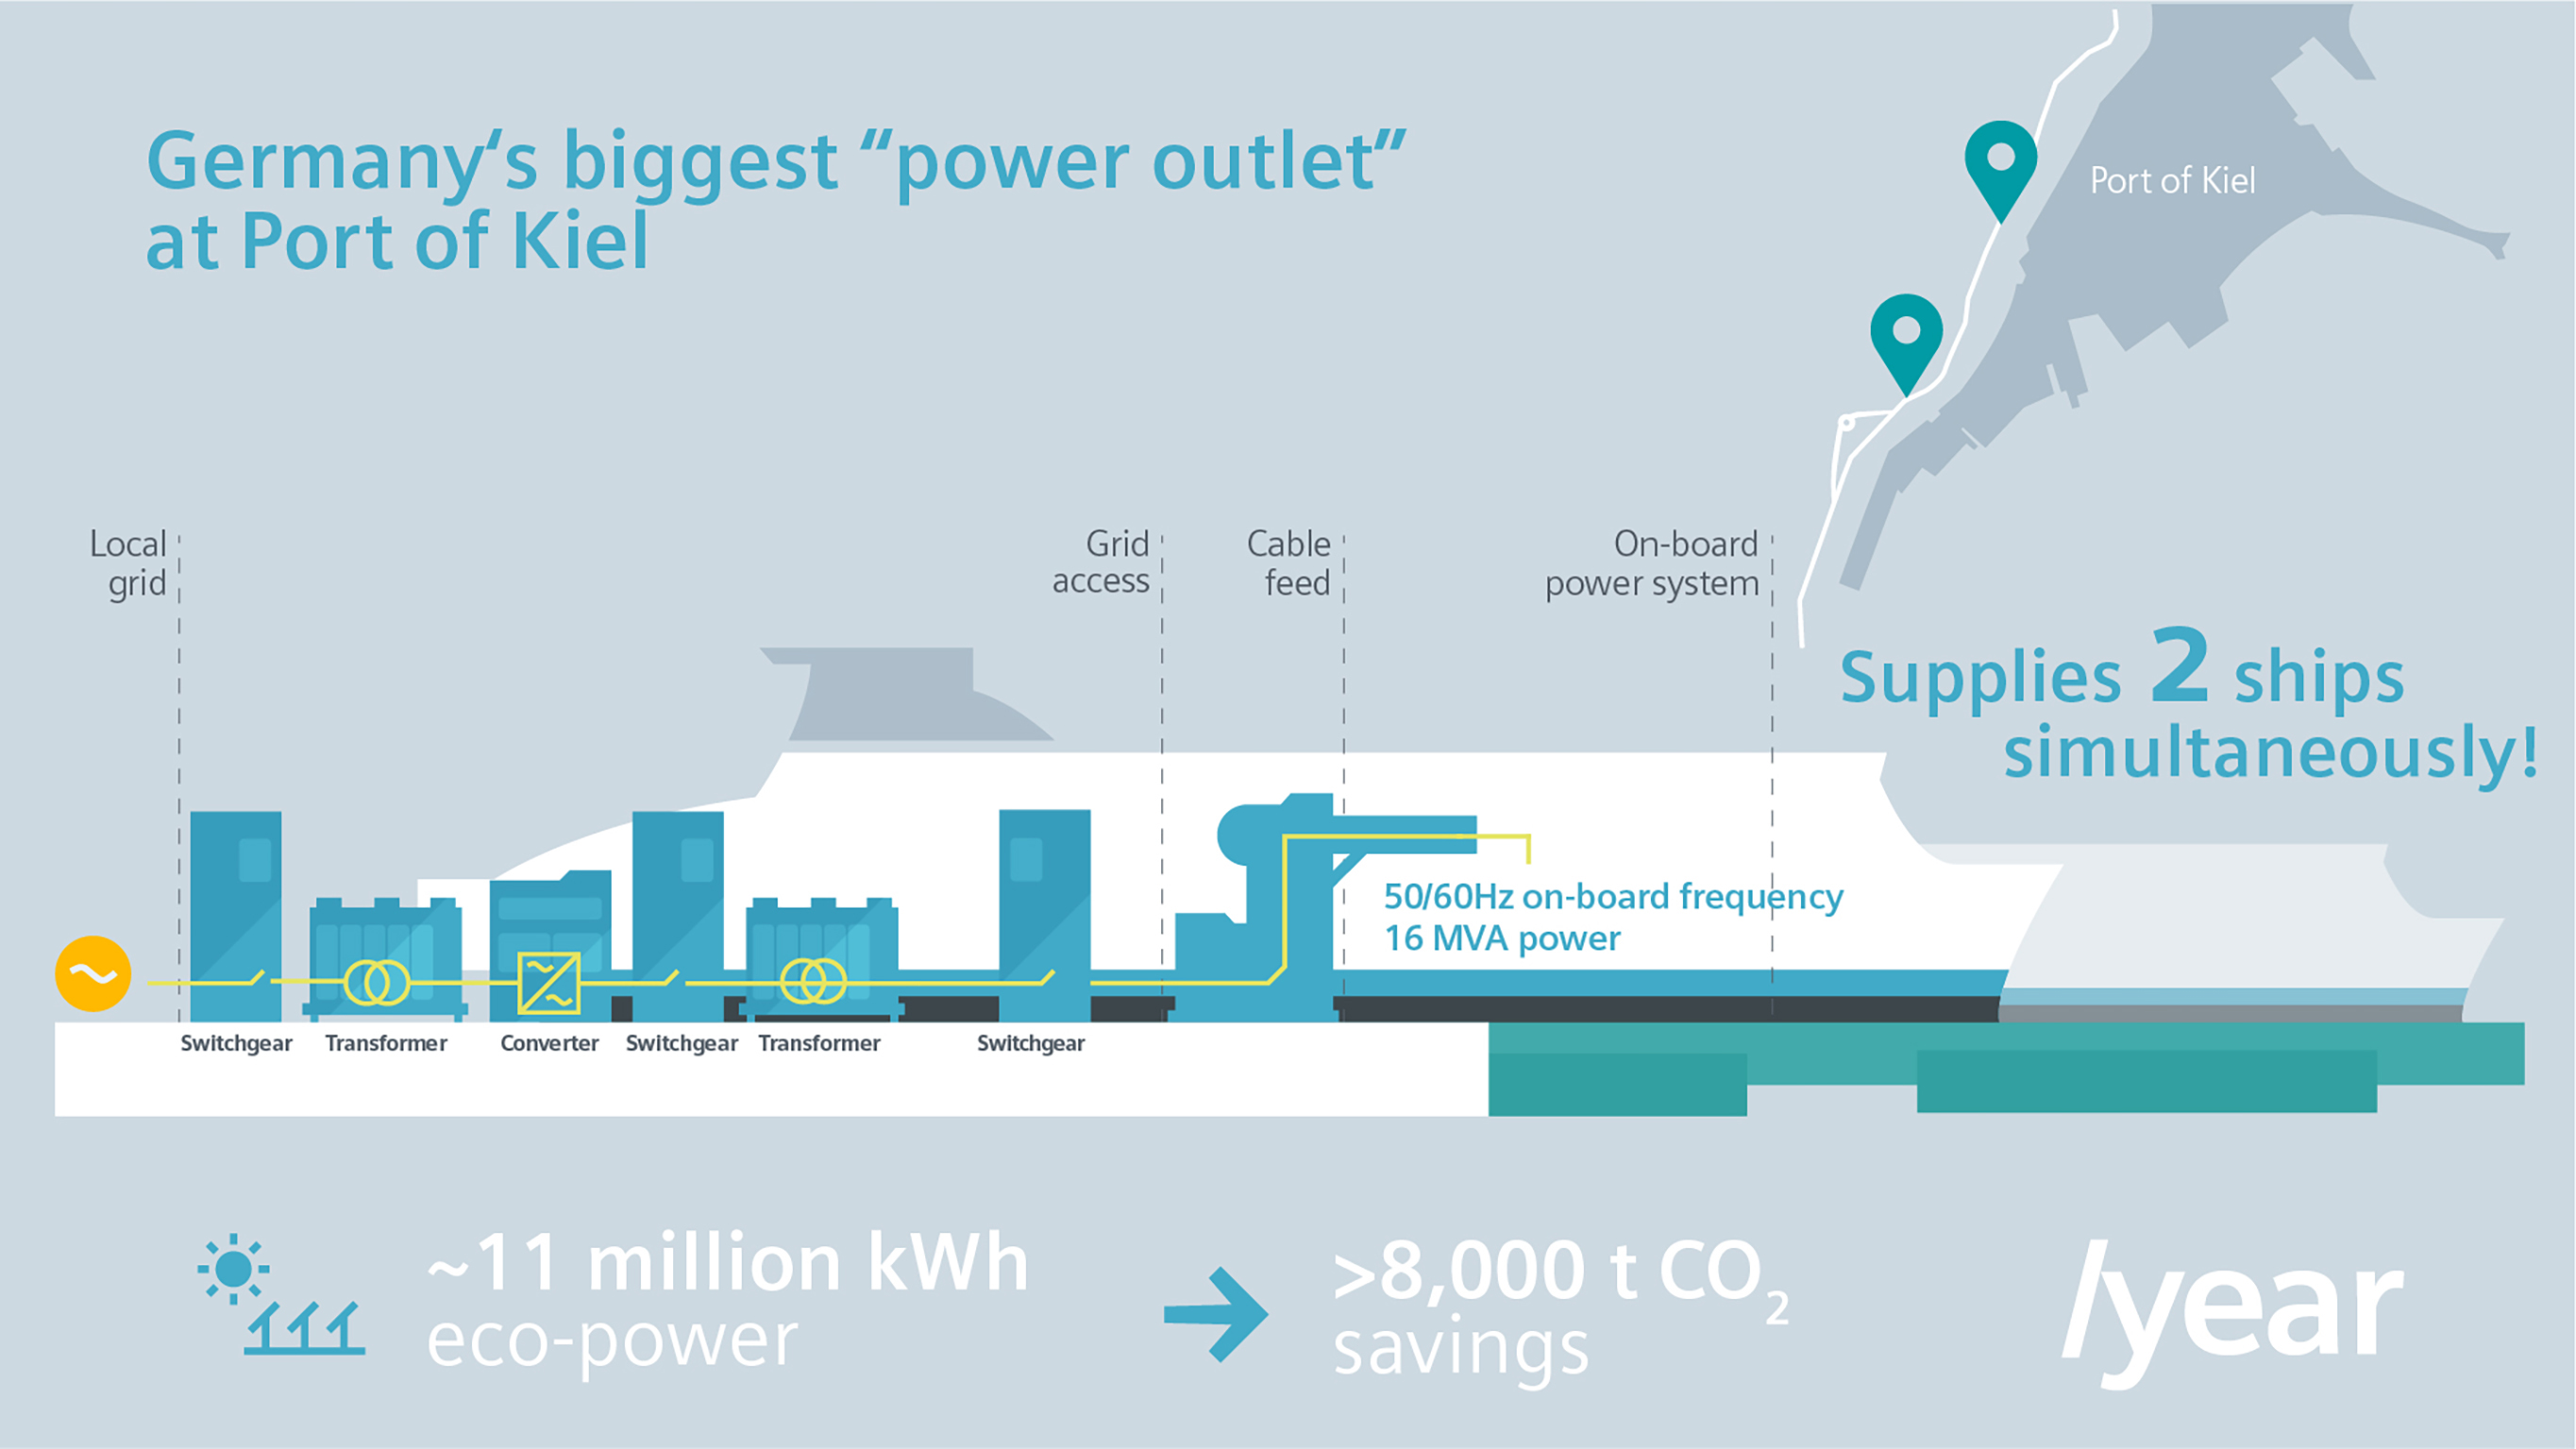 Siemens builds Germany’s largest “power outlet” for ships for Port of Kiel